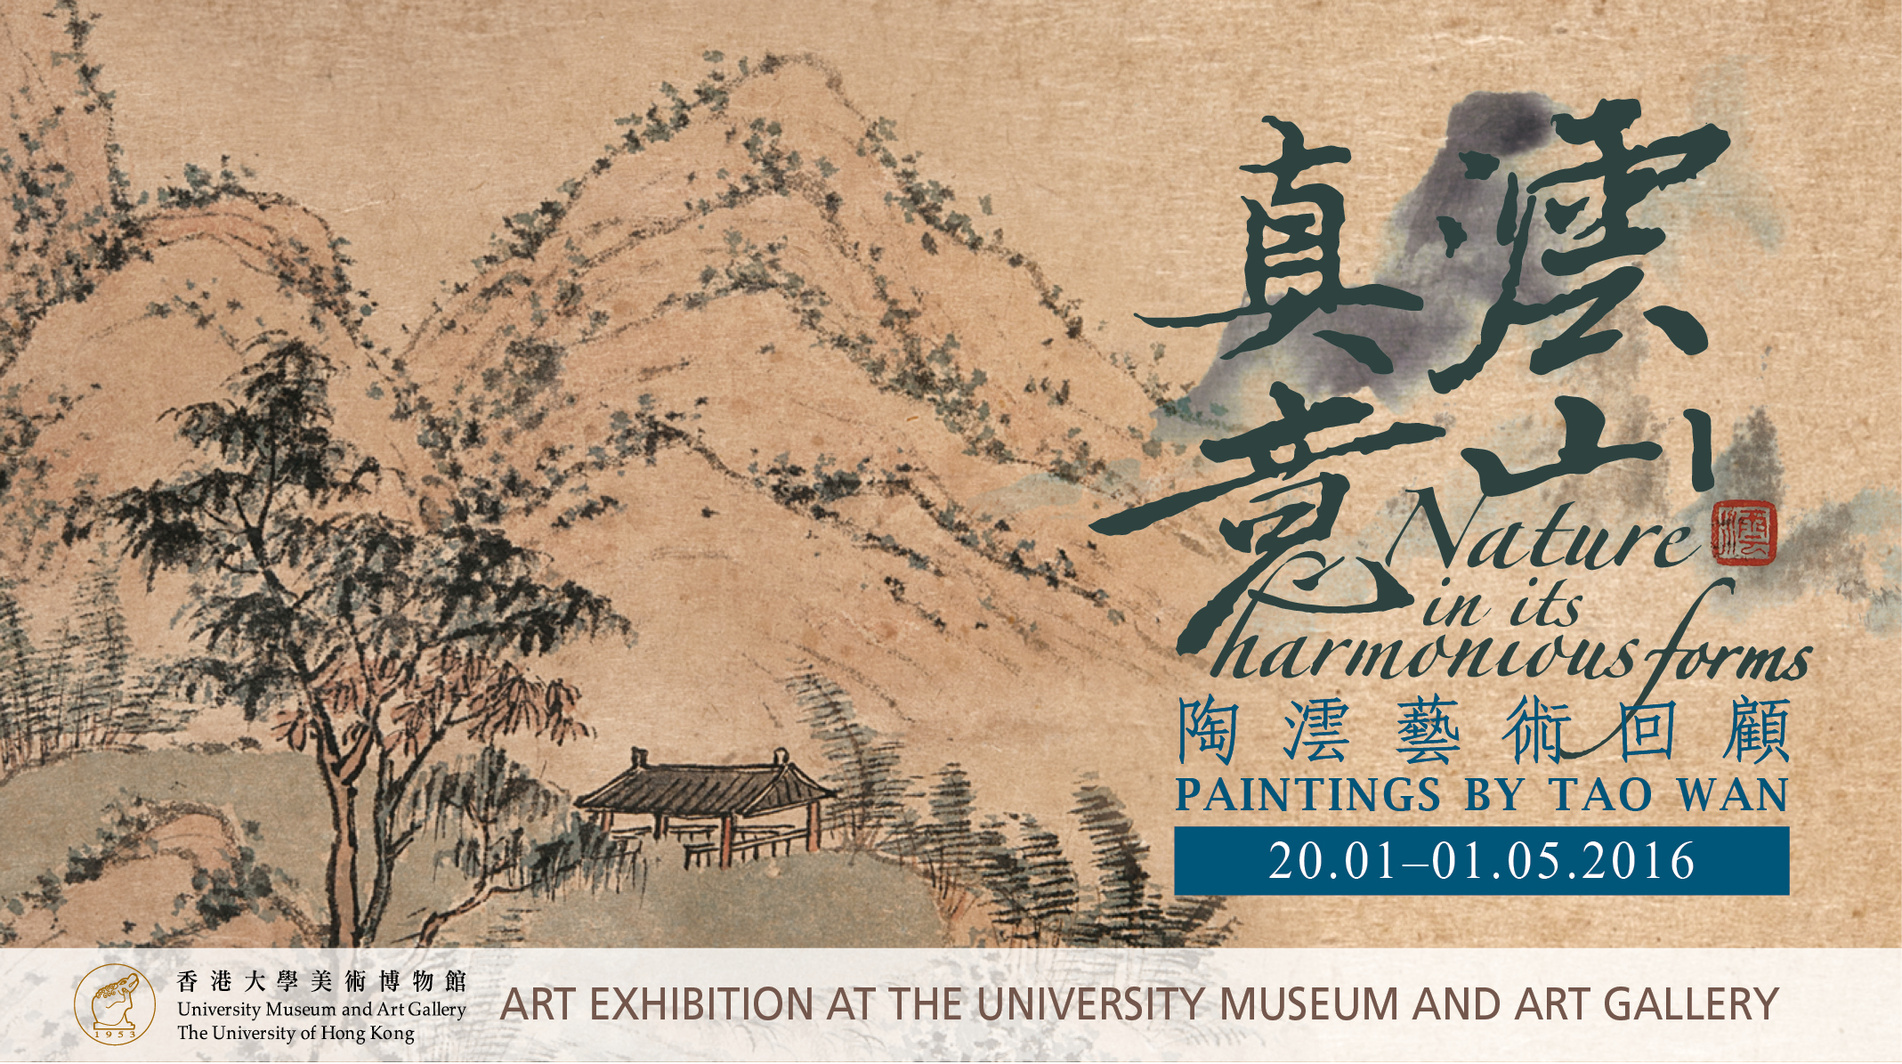 [EXHIBITION 展覽] Nature in its harmonious forms: Paintings by Tao Wan 澐山‧真意：陶澐書畫回顧